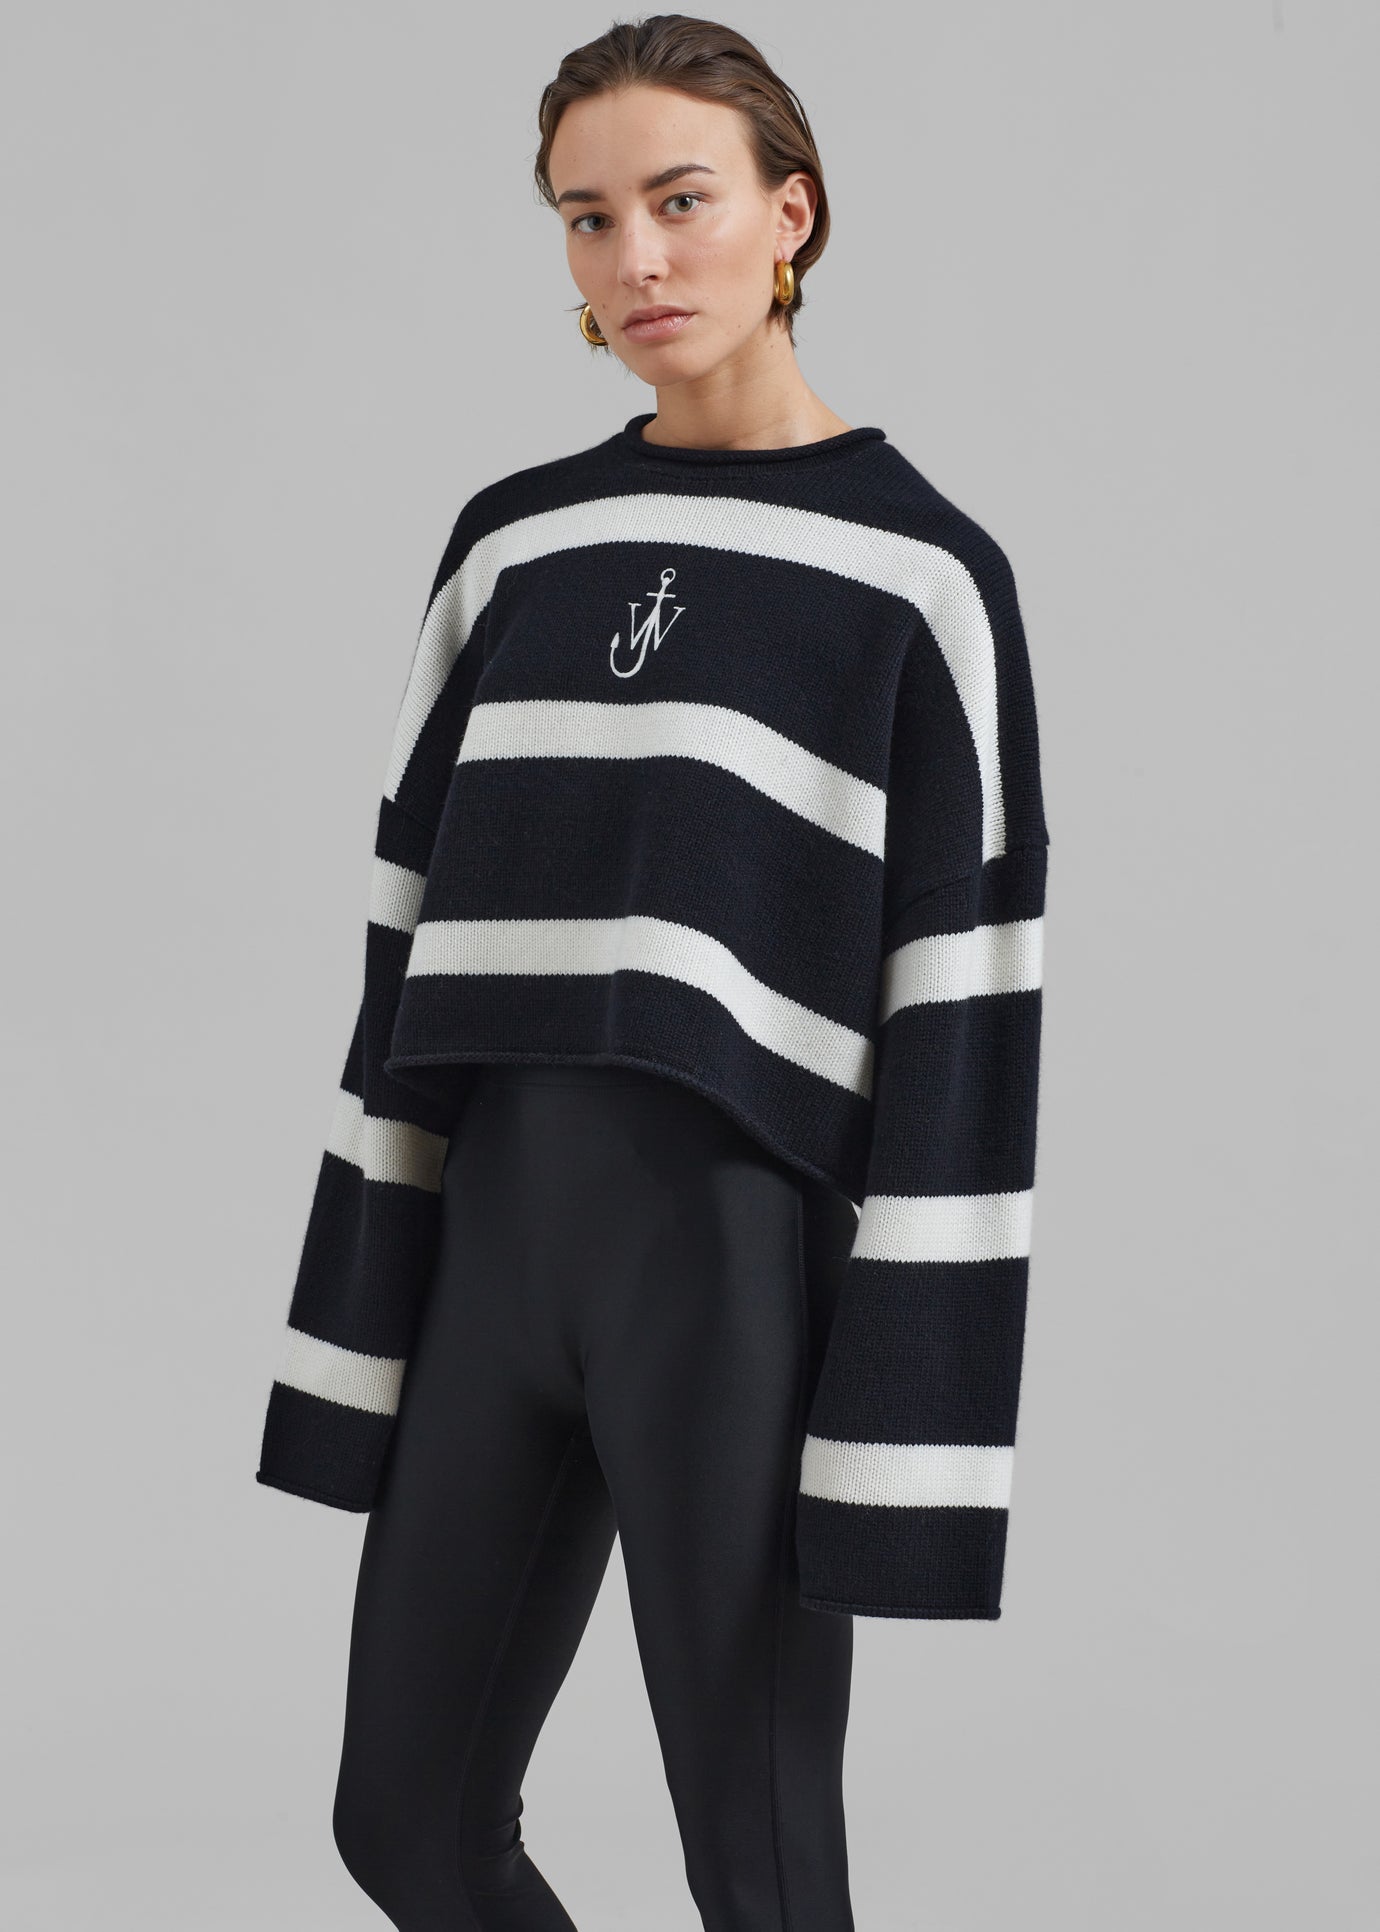 JW Anderson Cropped Anchor Jumper - Black/White